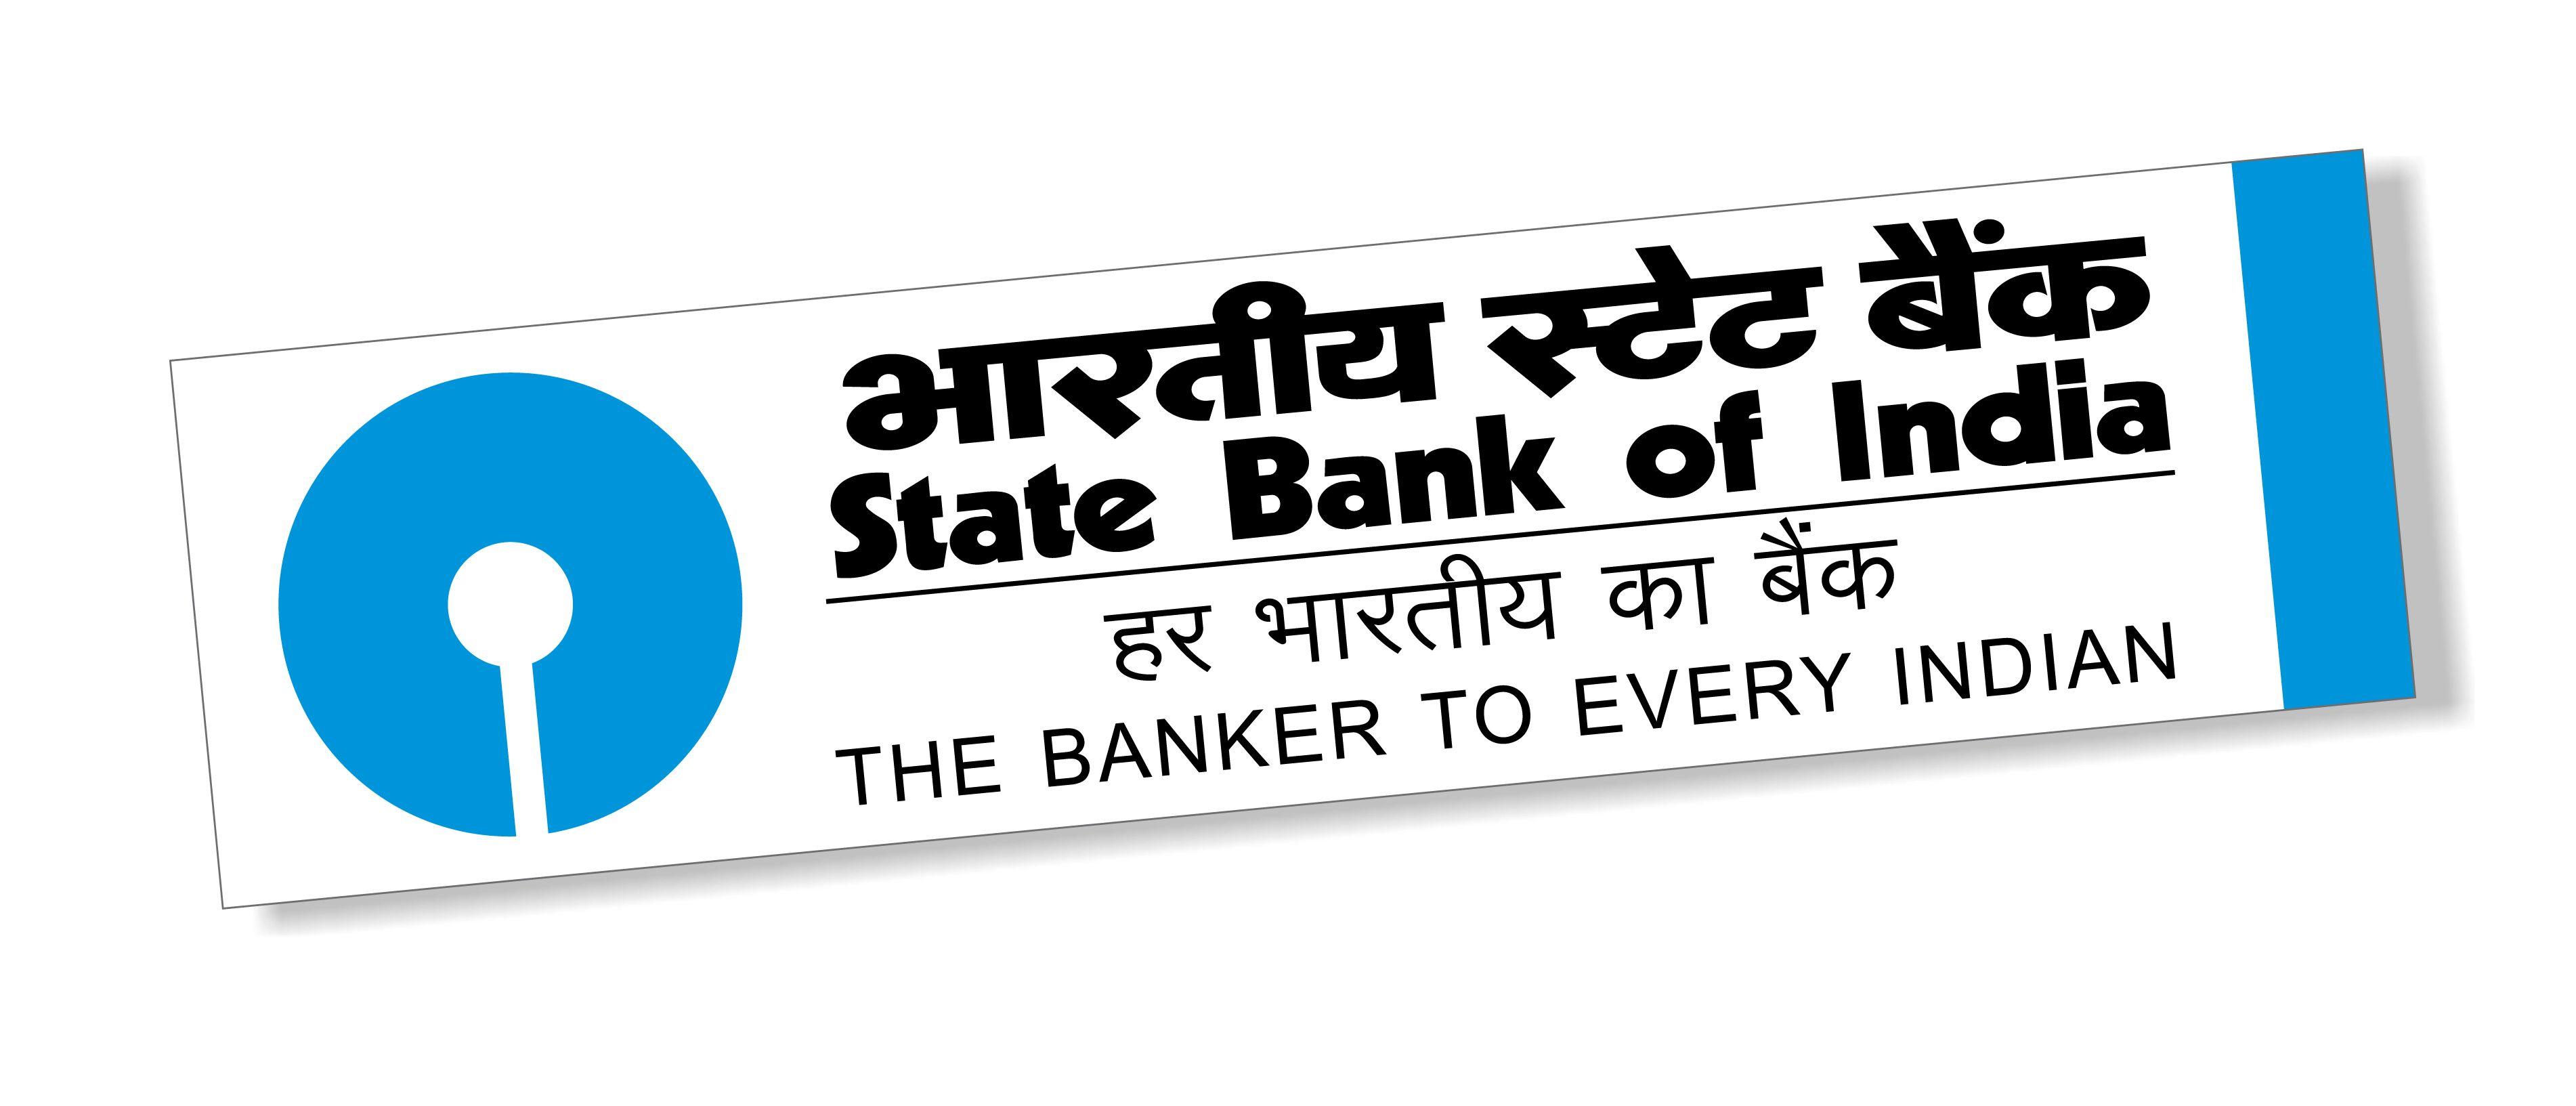 State Bank of India Logo - State Bank of India and Oracle India Collaborate on Digital Skills